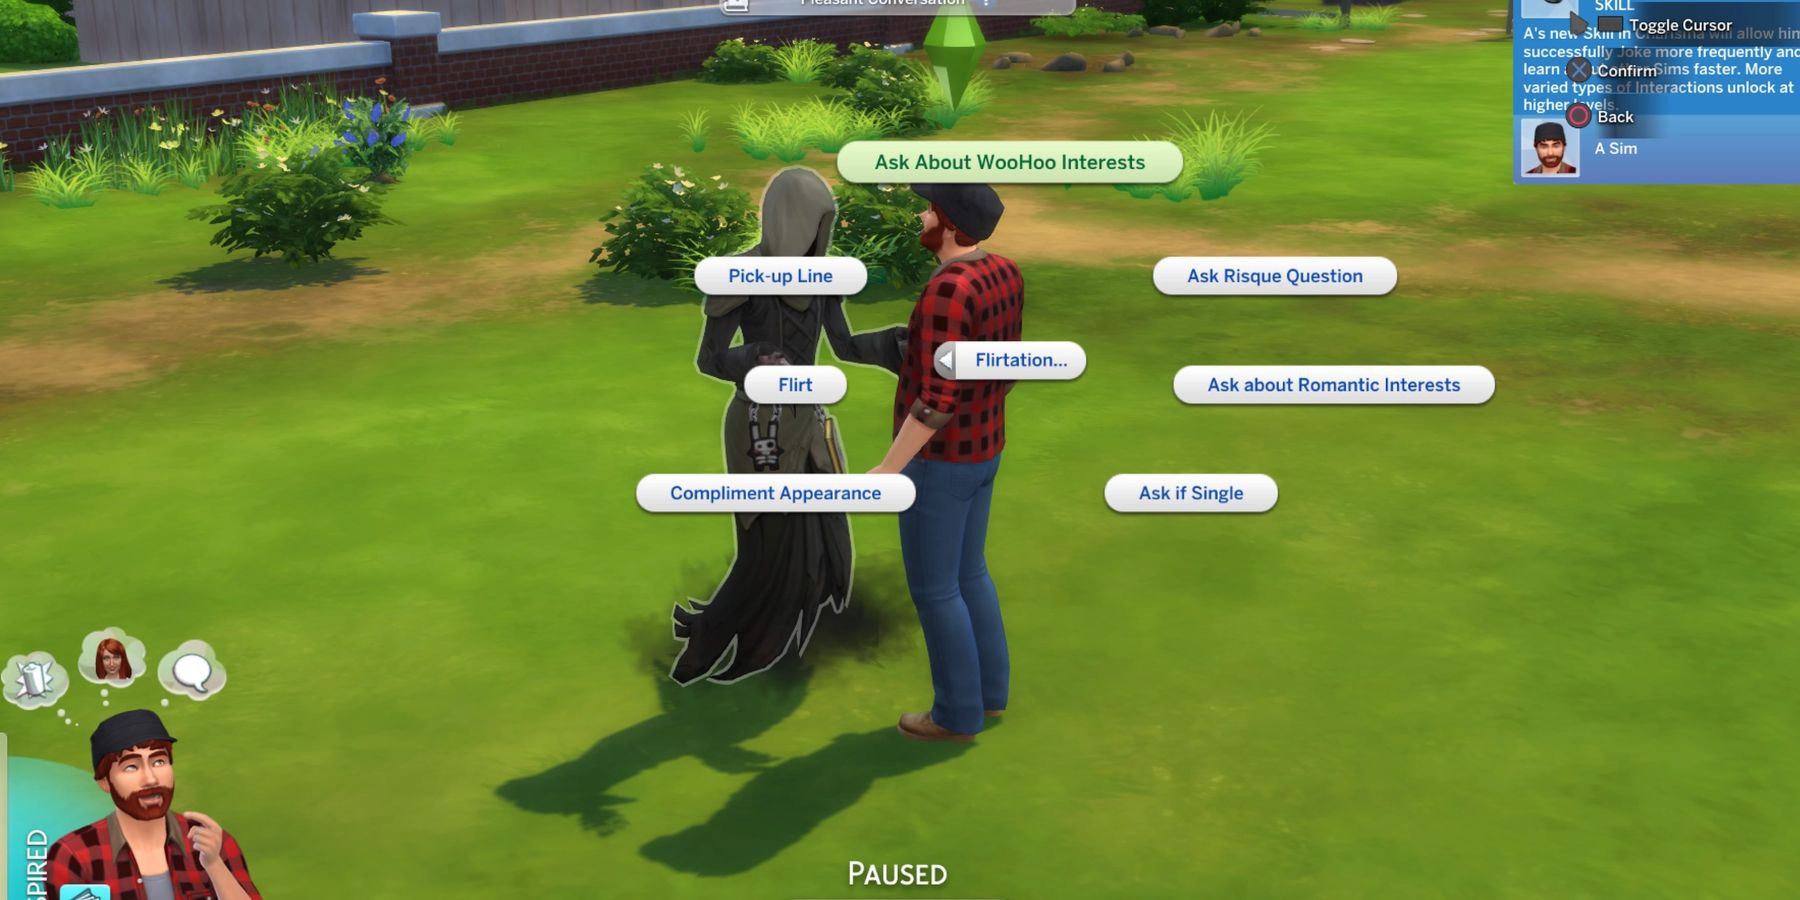 The Grim Reaper in The Sims 4